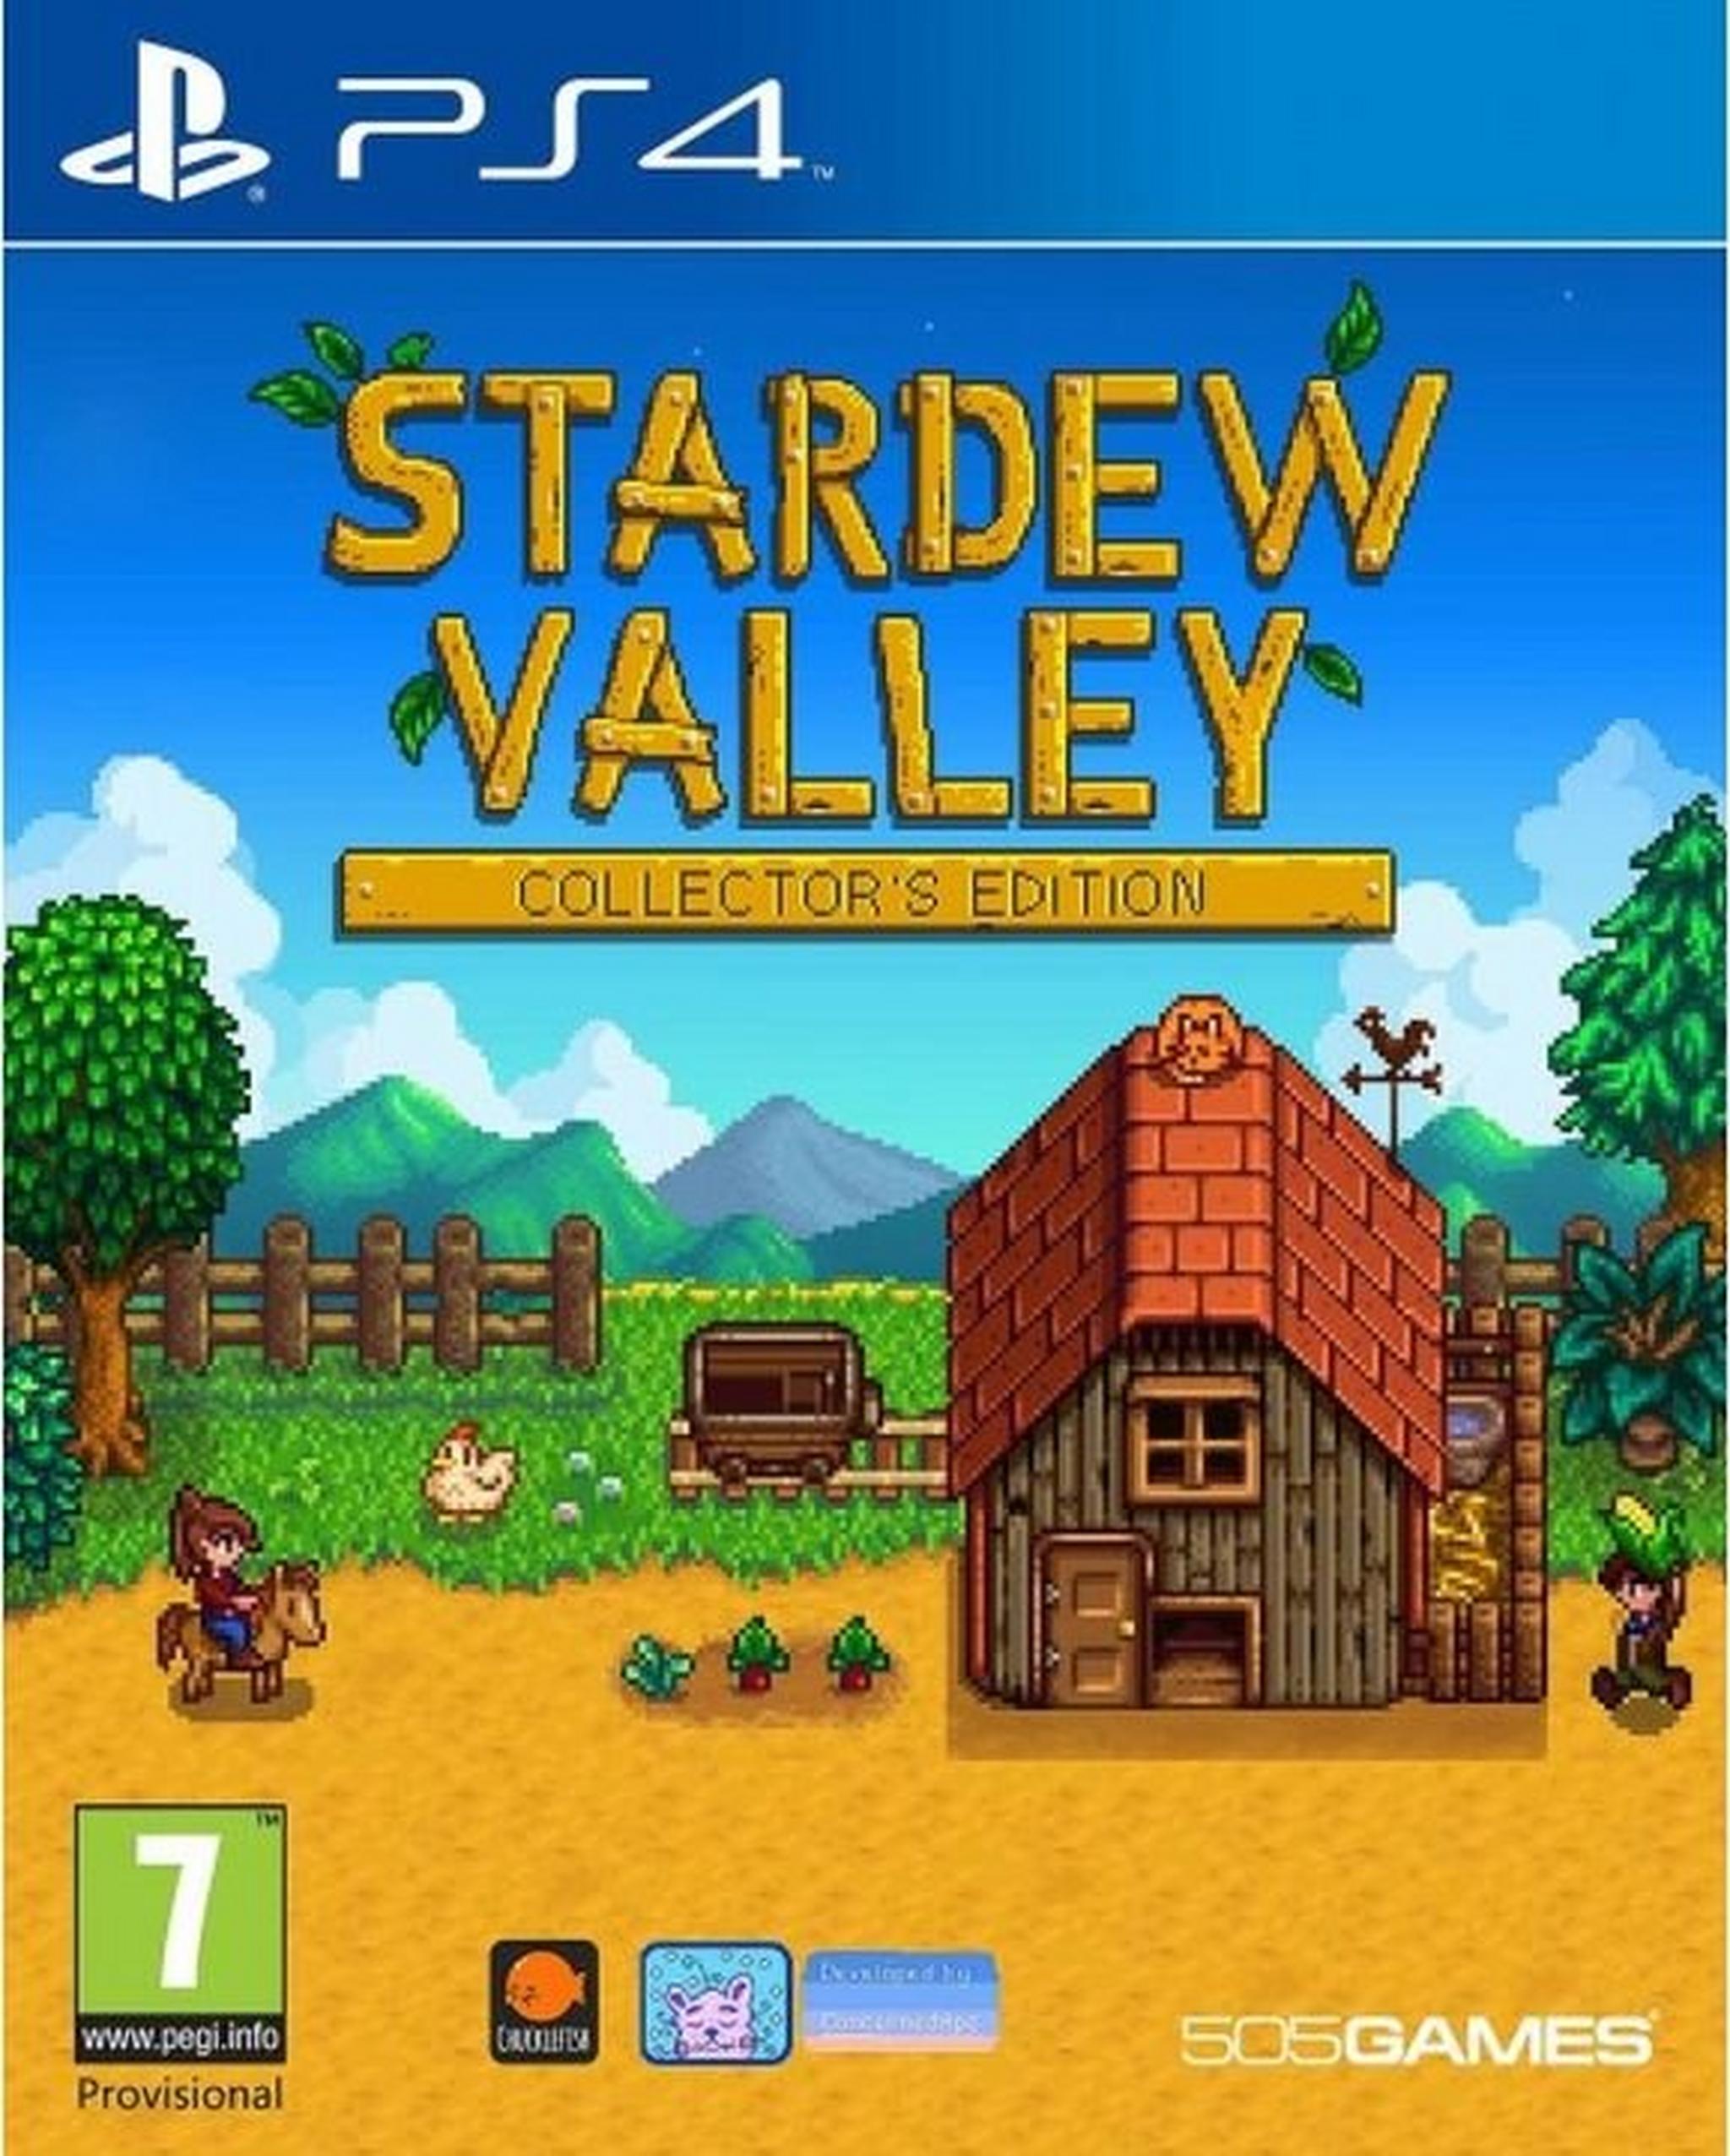 Stardew Valley Collector’s Edition – Playstation 4 Game